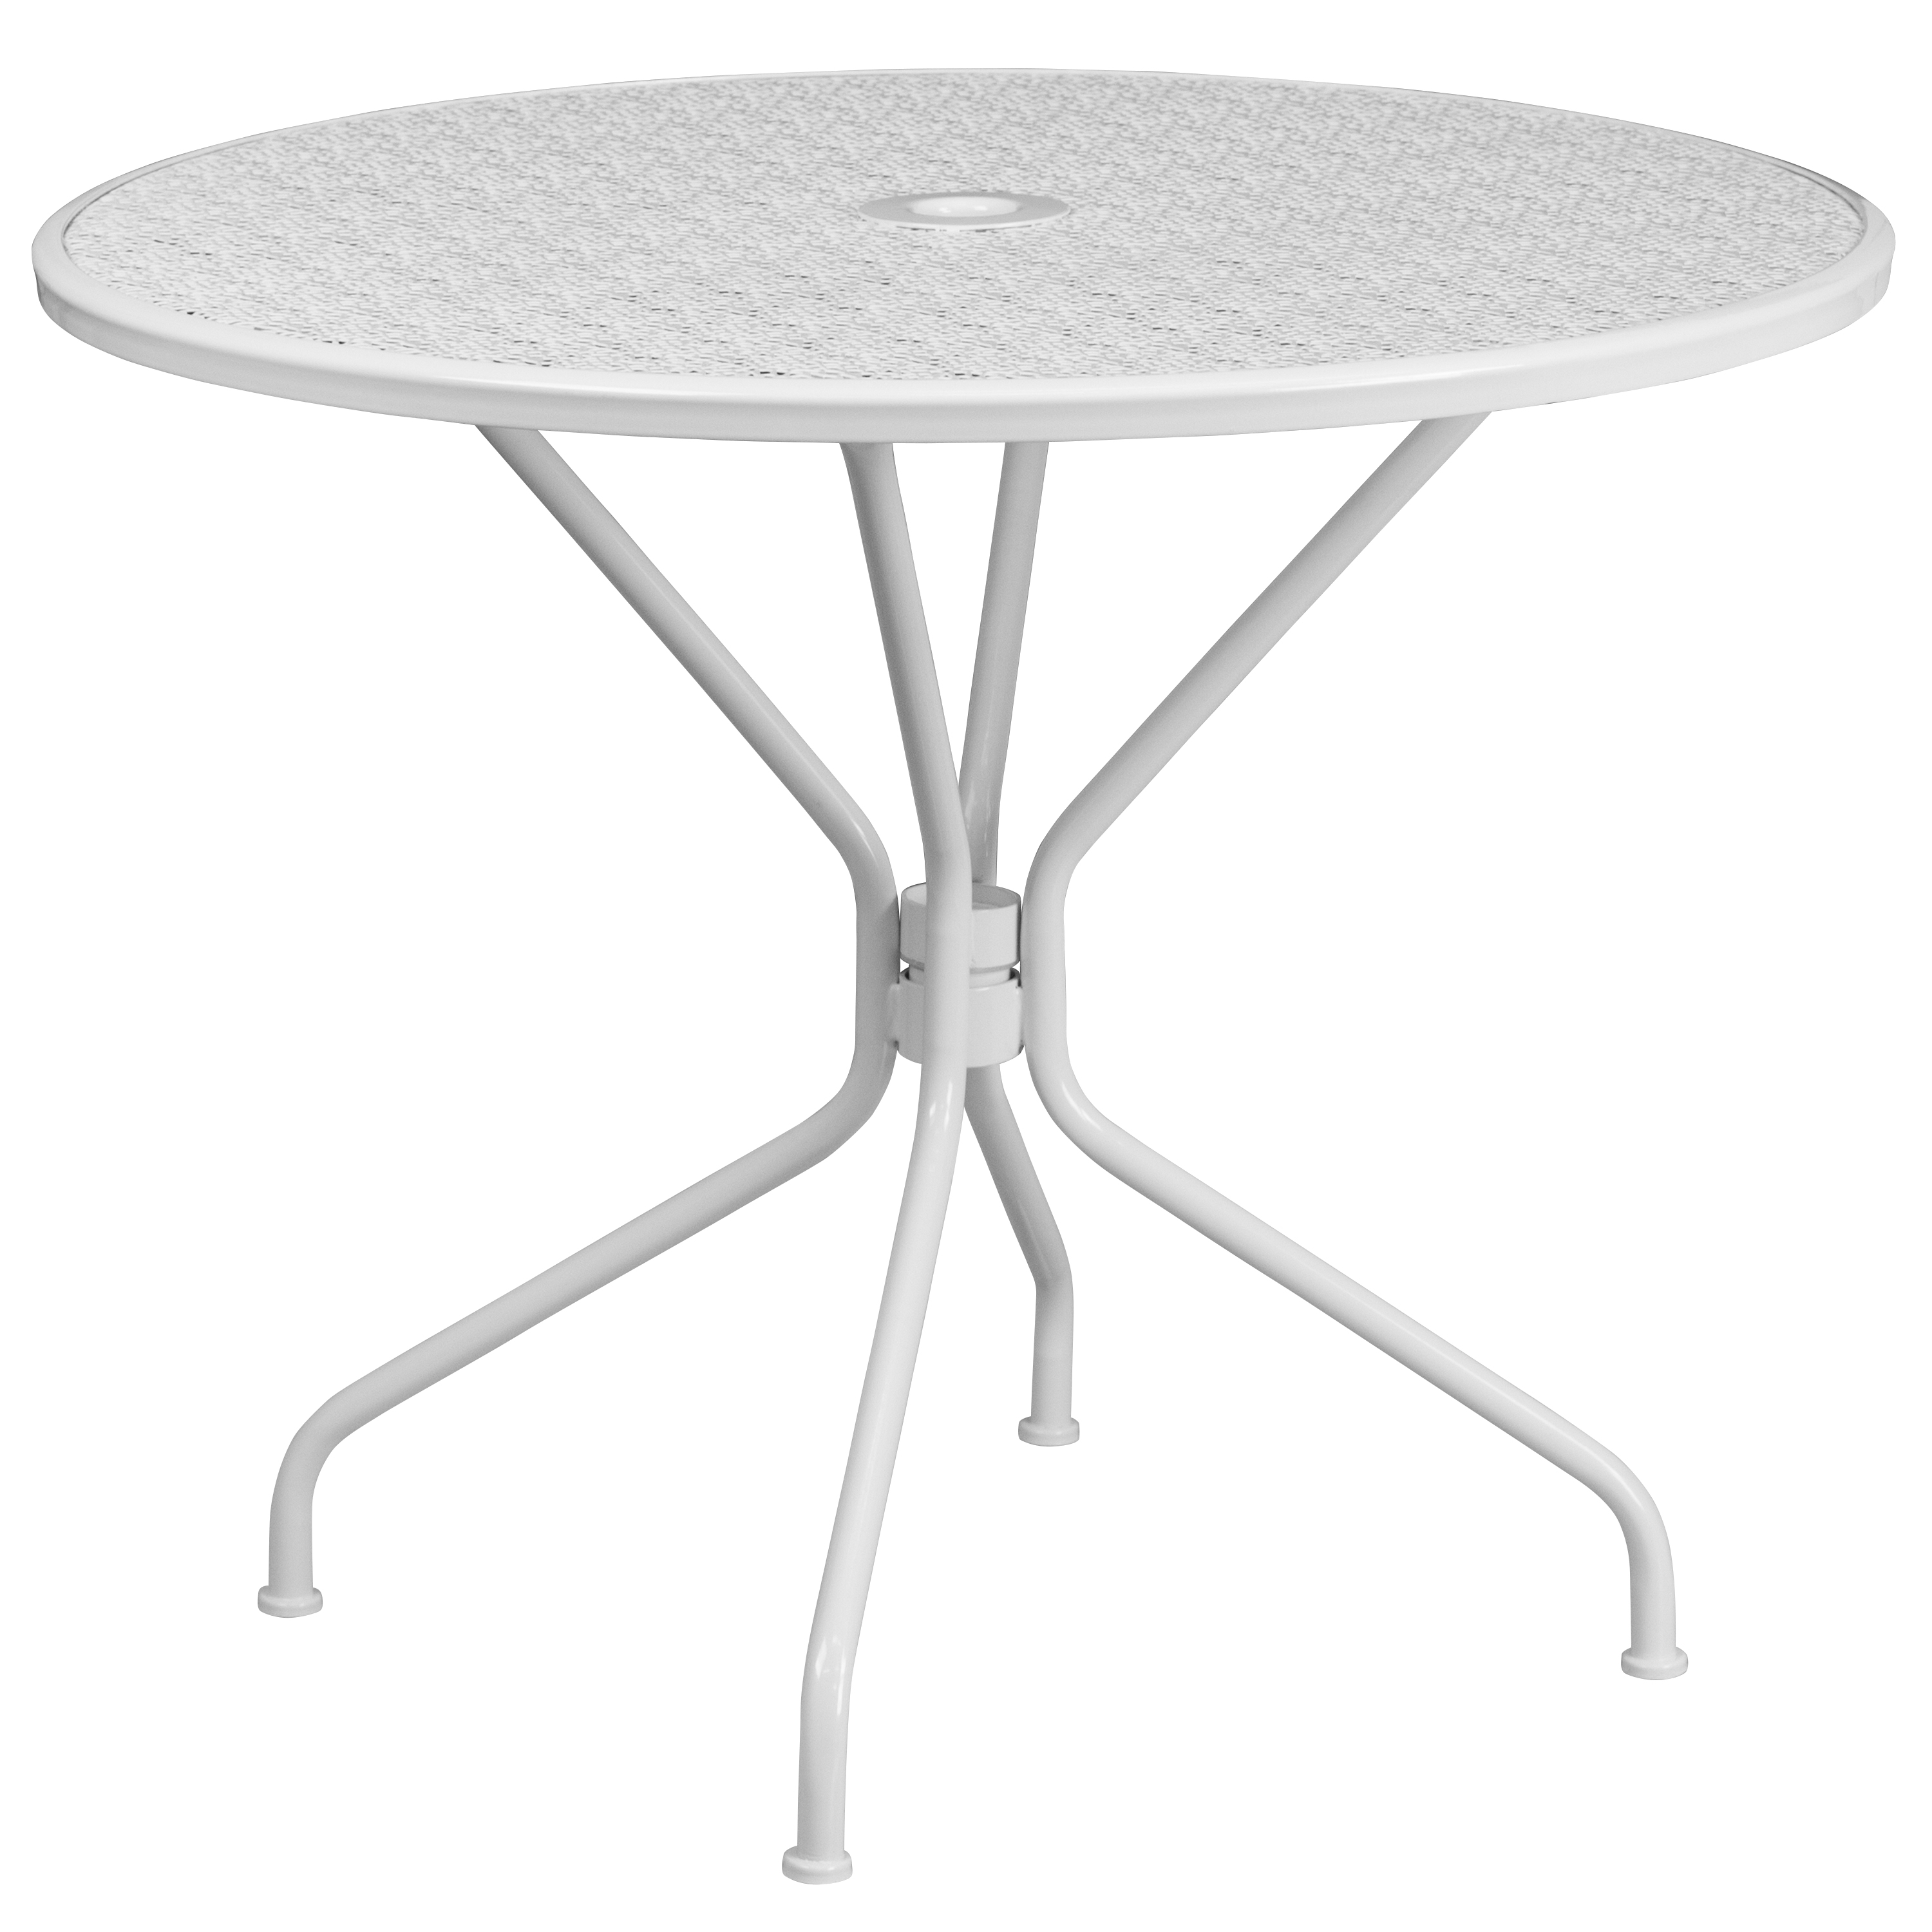 Flash Furniture Oia Commercial Grade 35.25" Round White Indoor-Outdoor Steel Patio Table Set with 4 Square Back Chairs - image 4 of 5